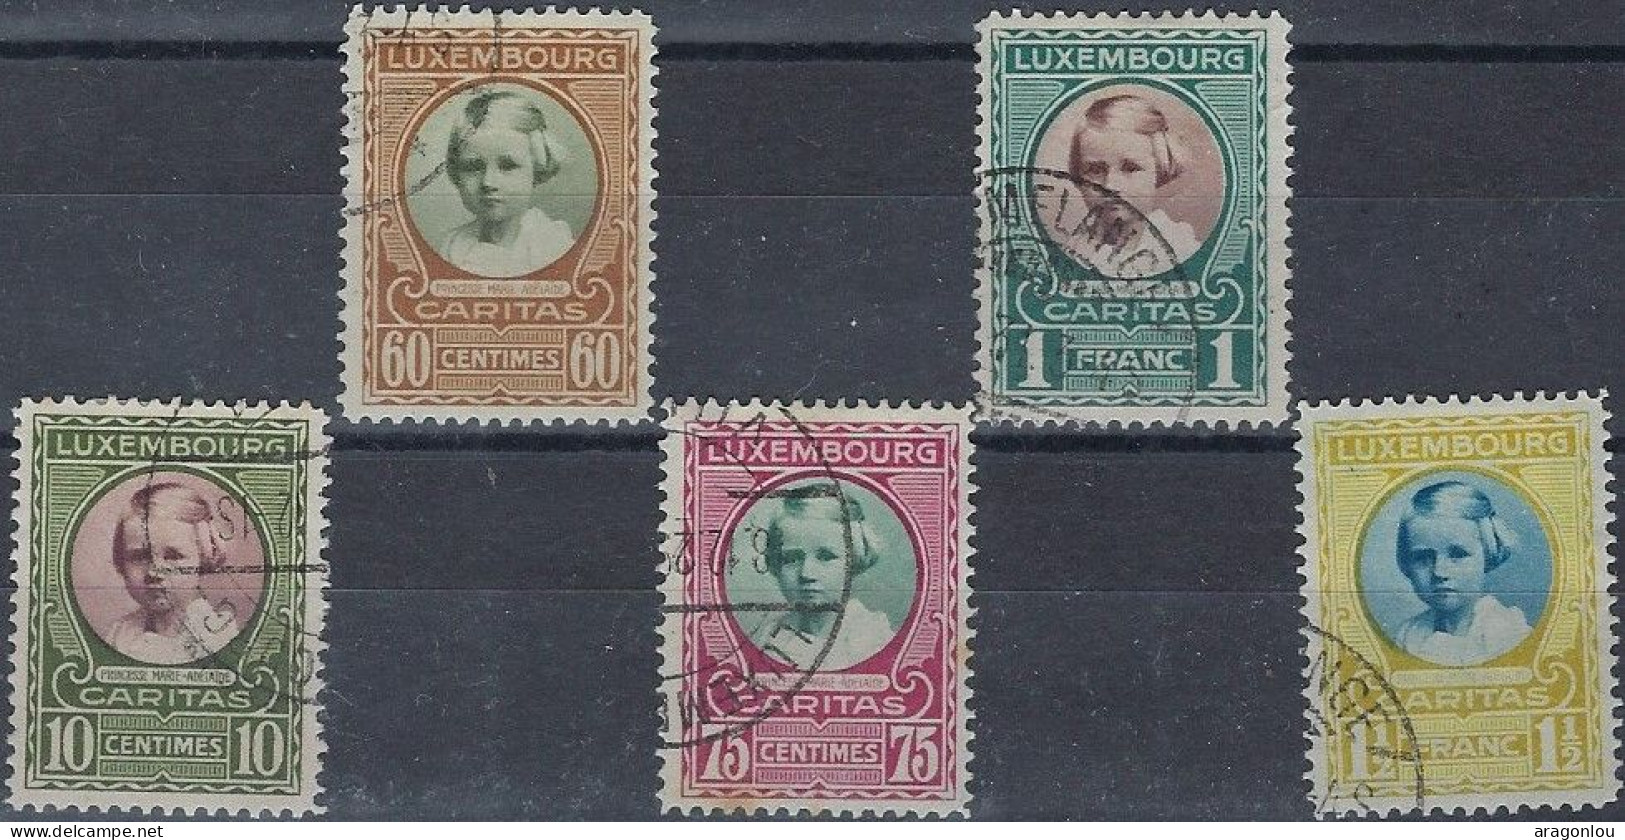 Luxembourg - Luxemburg -  Timbre  Série   1928   °   Marie - Adélaïde    VC. 60,- - Used Stamps